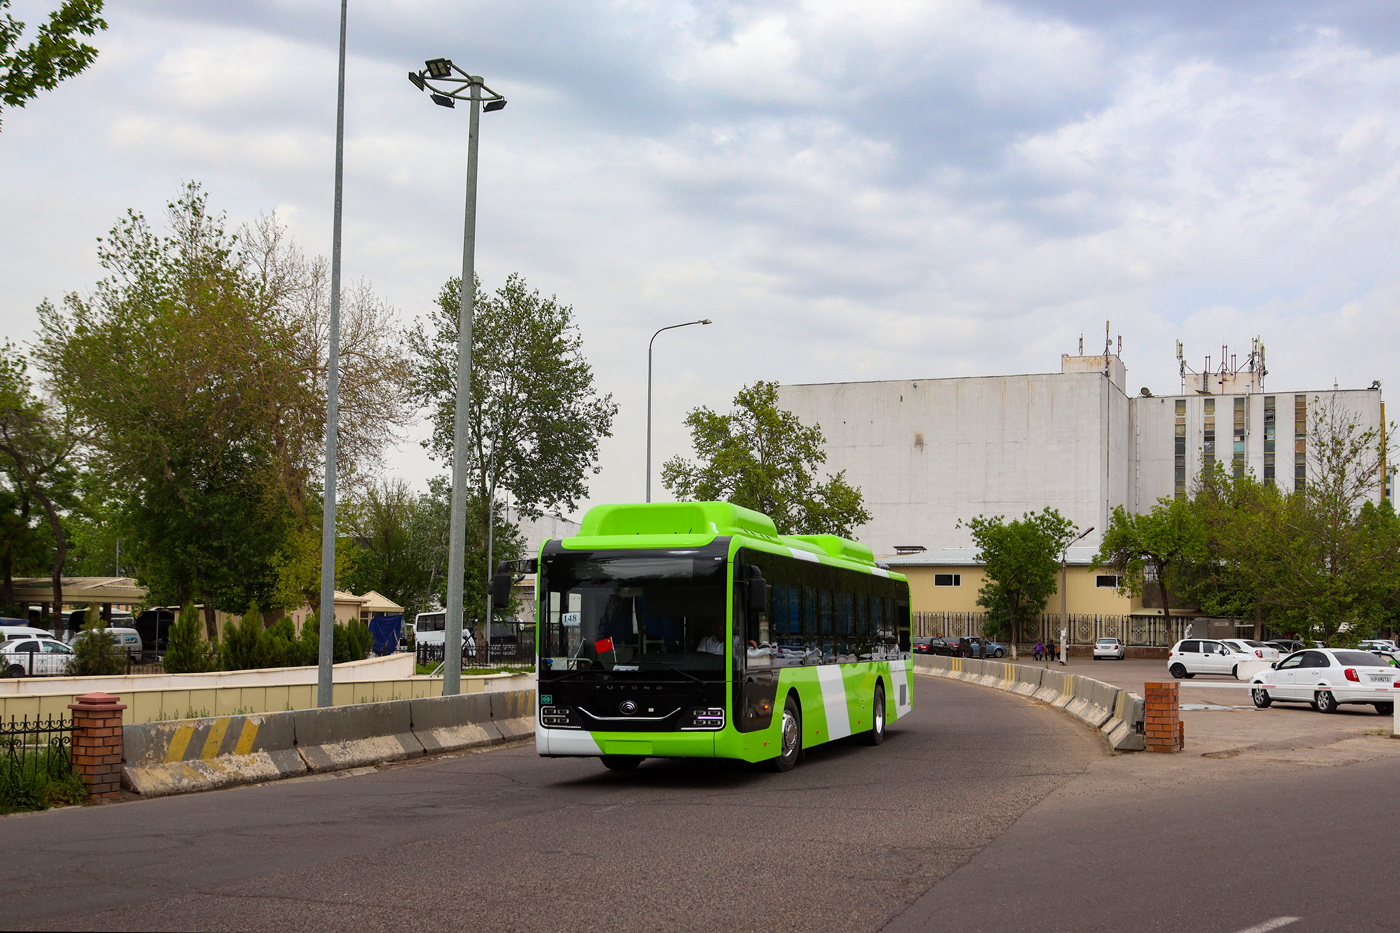 Tashkent — New buses without a number registration